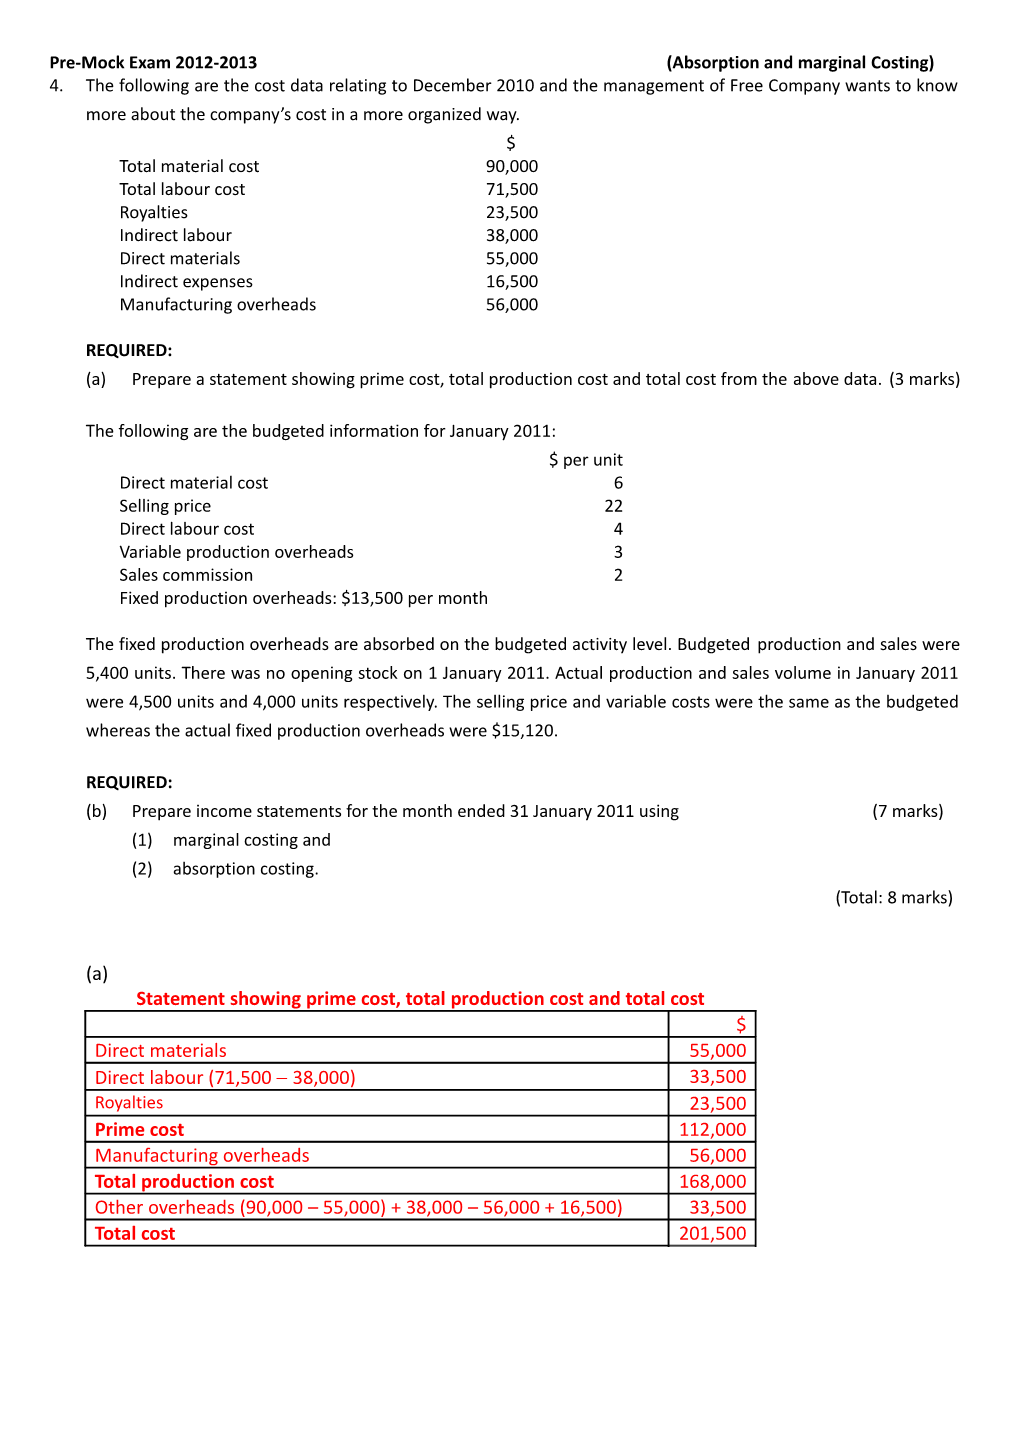 Pre-Mock Exam 2012-2013(Absorption and Marginal Costing)